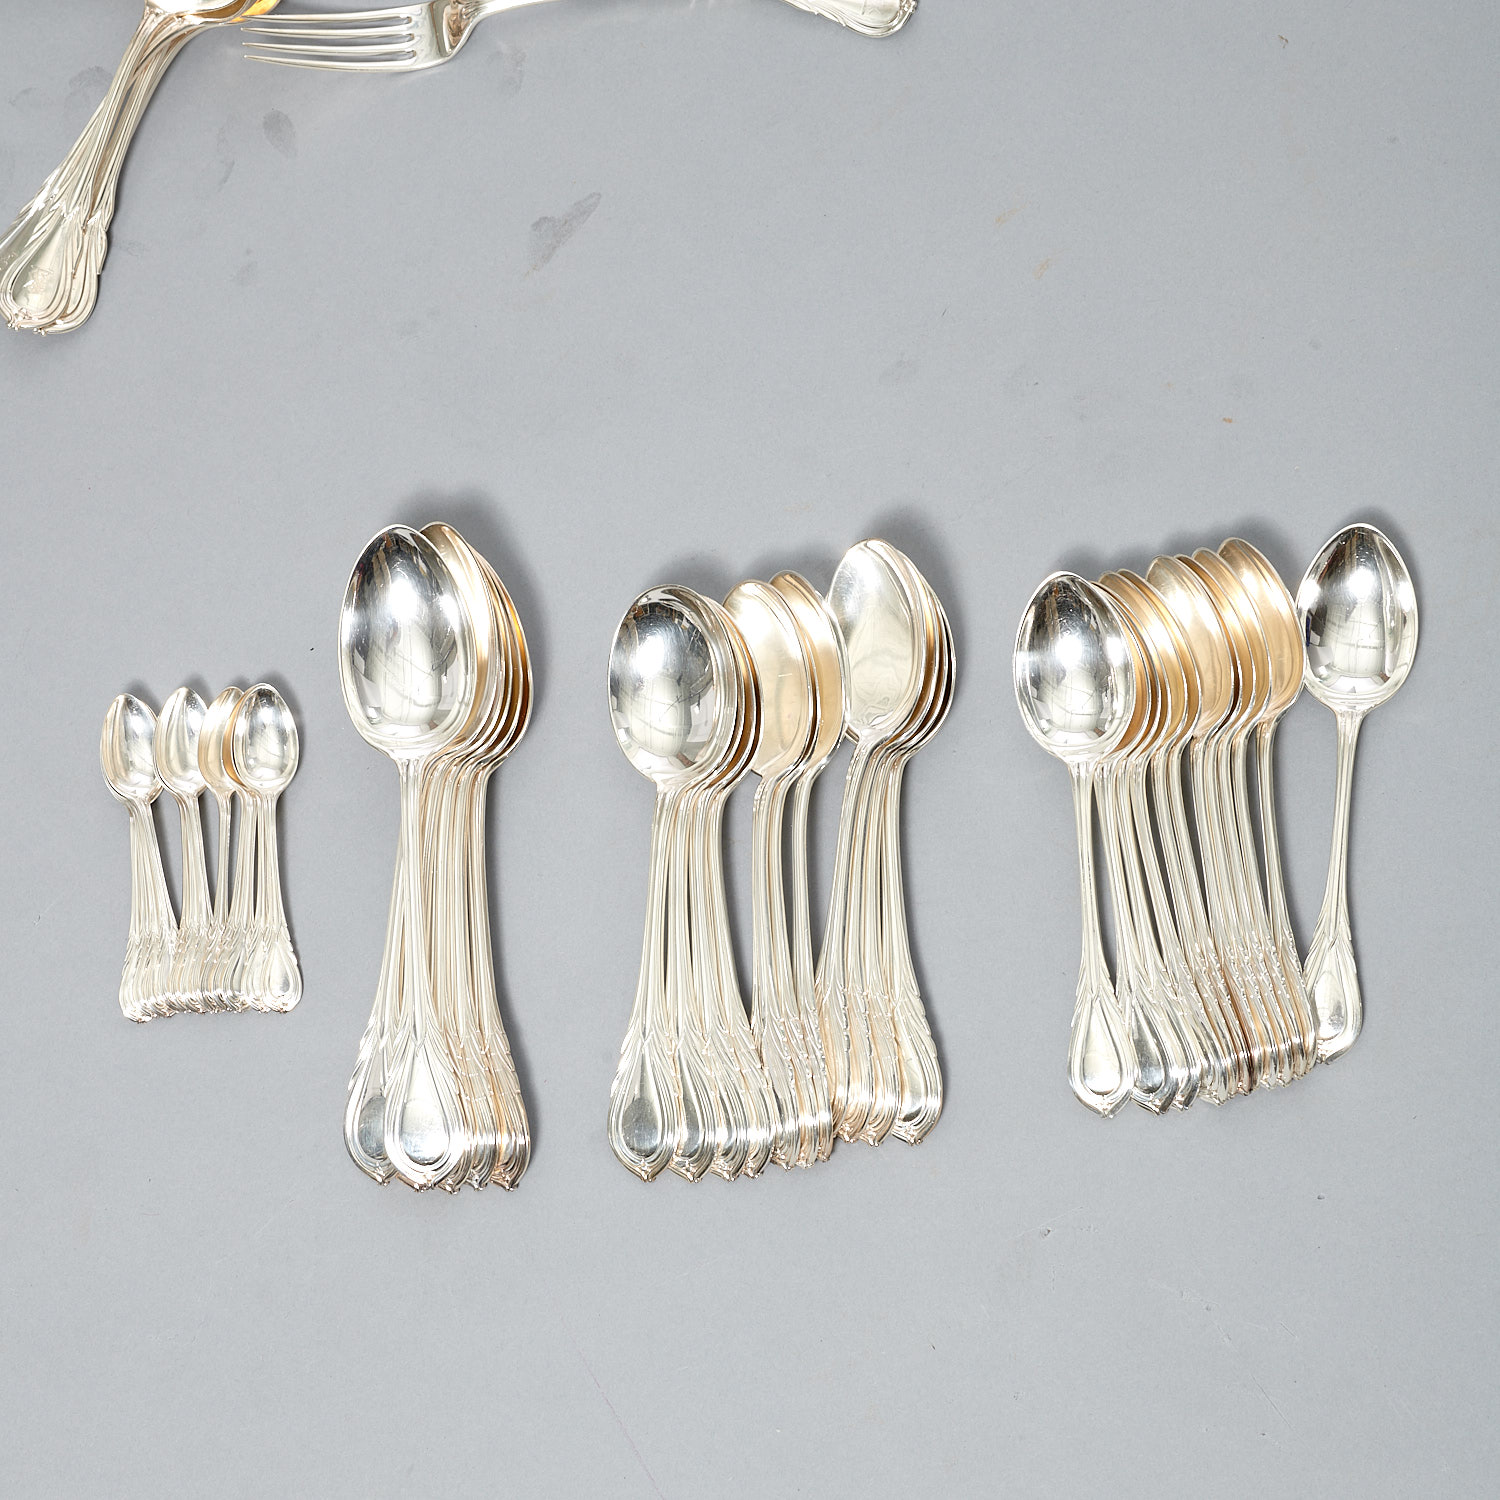 Extensive English silver flatware service - Image 11 of 13